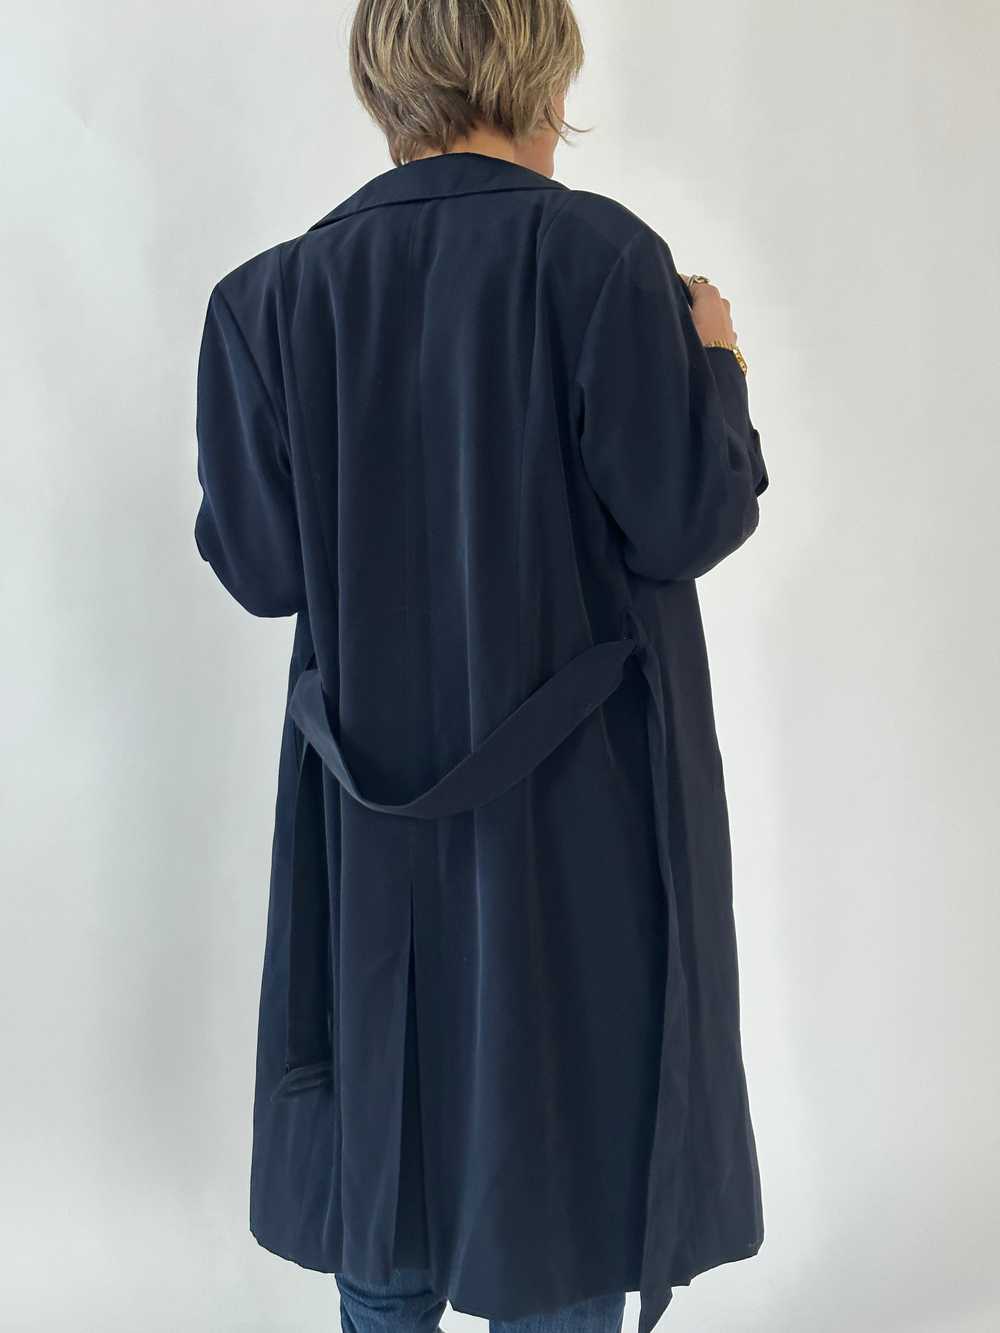 Vintage Navy Petite Trench - image 3